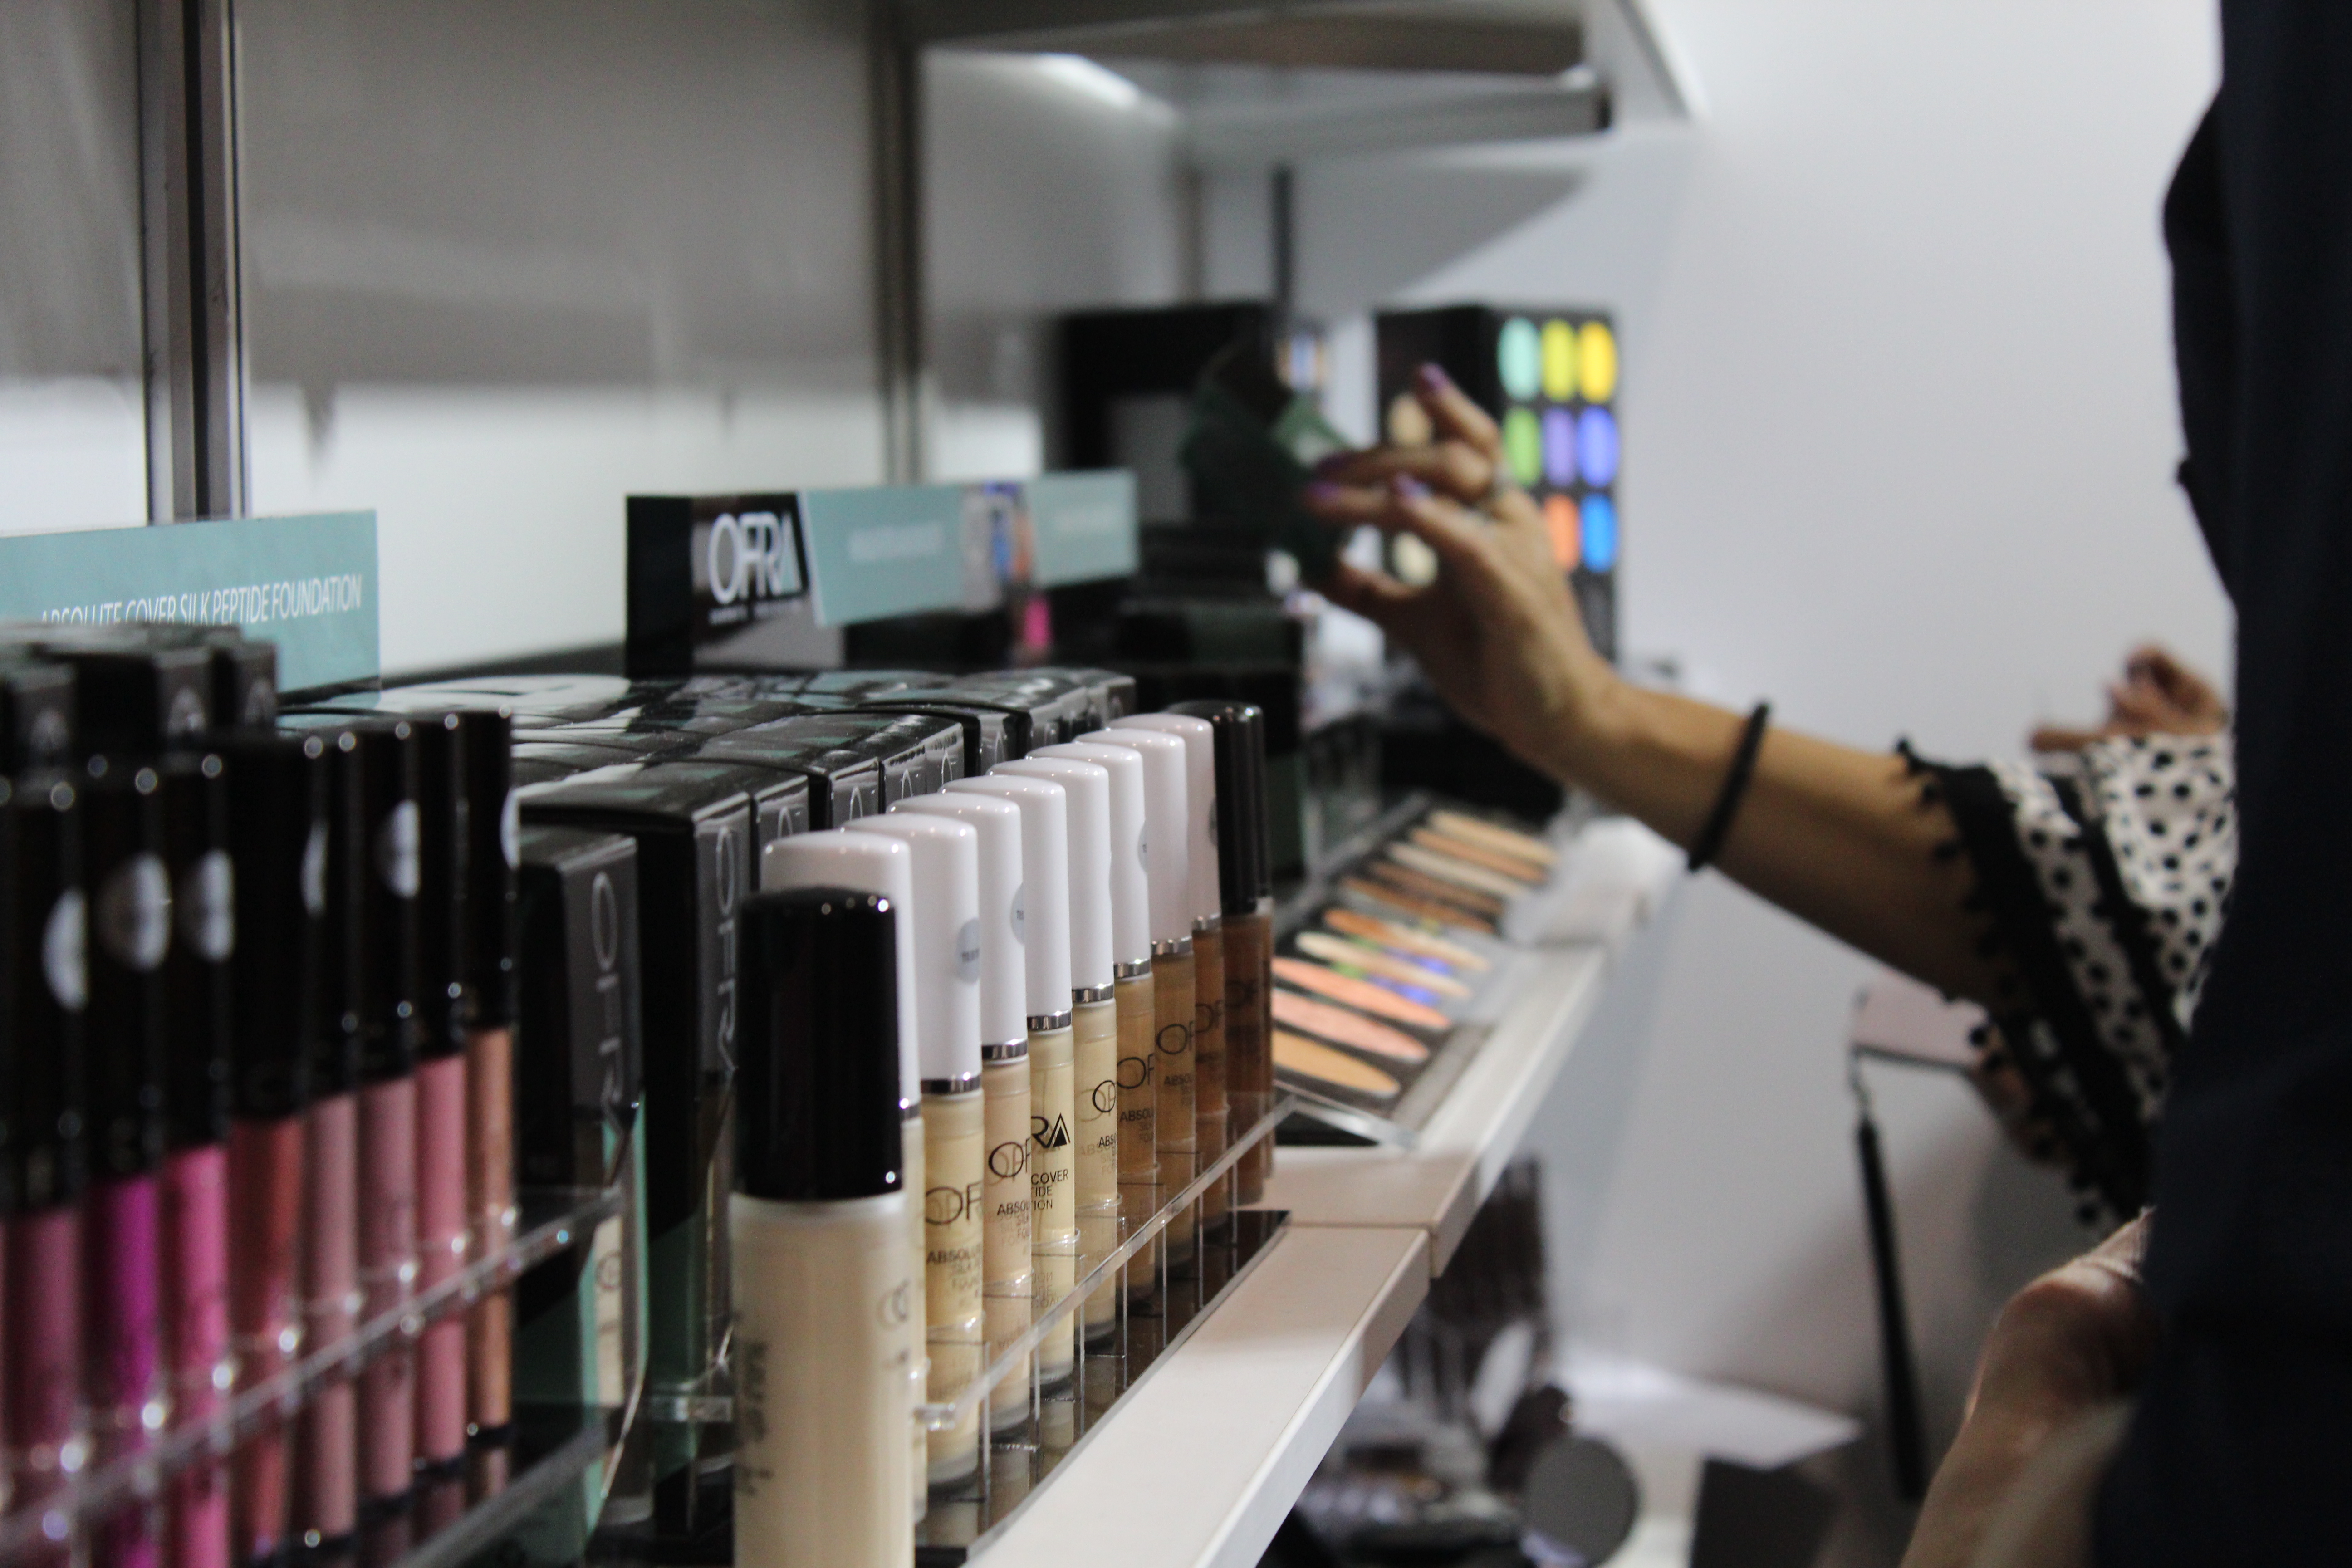 OFRA cosmetics on display at the Beauty Expo in Melbourne